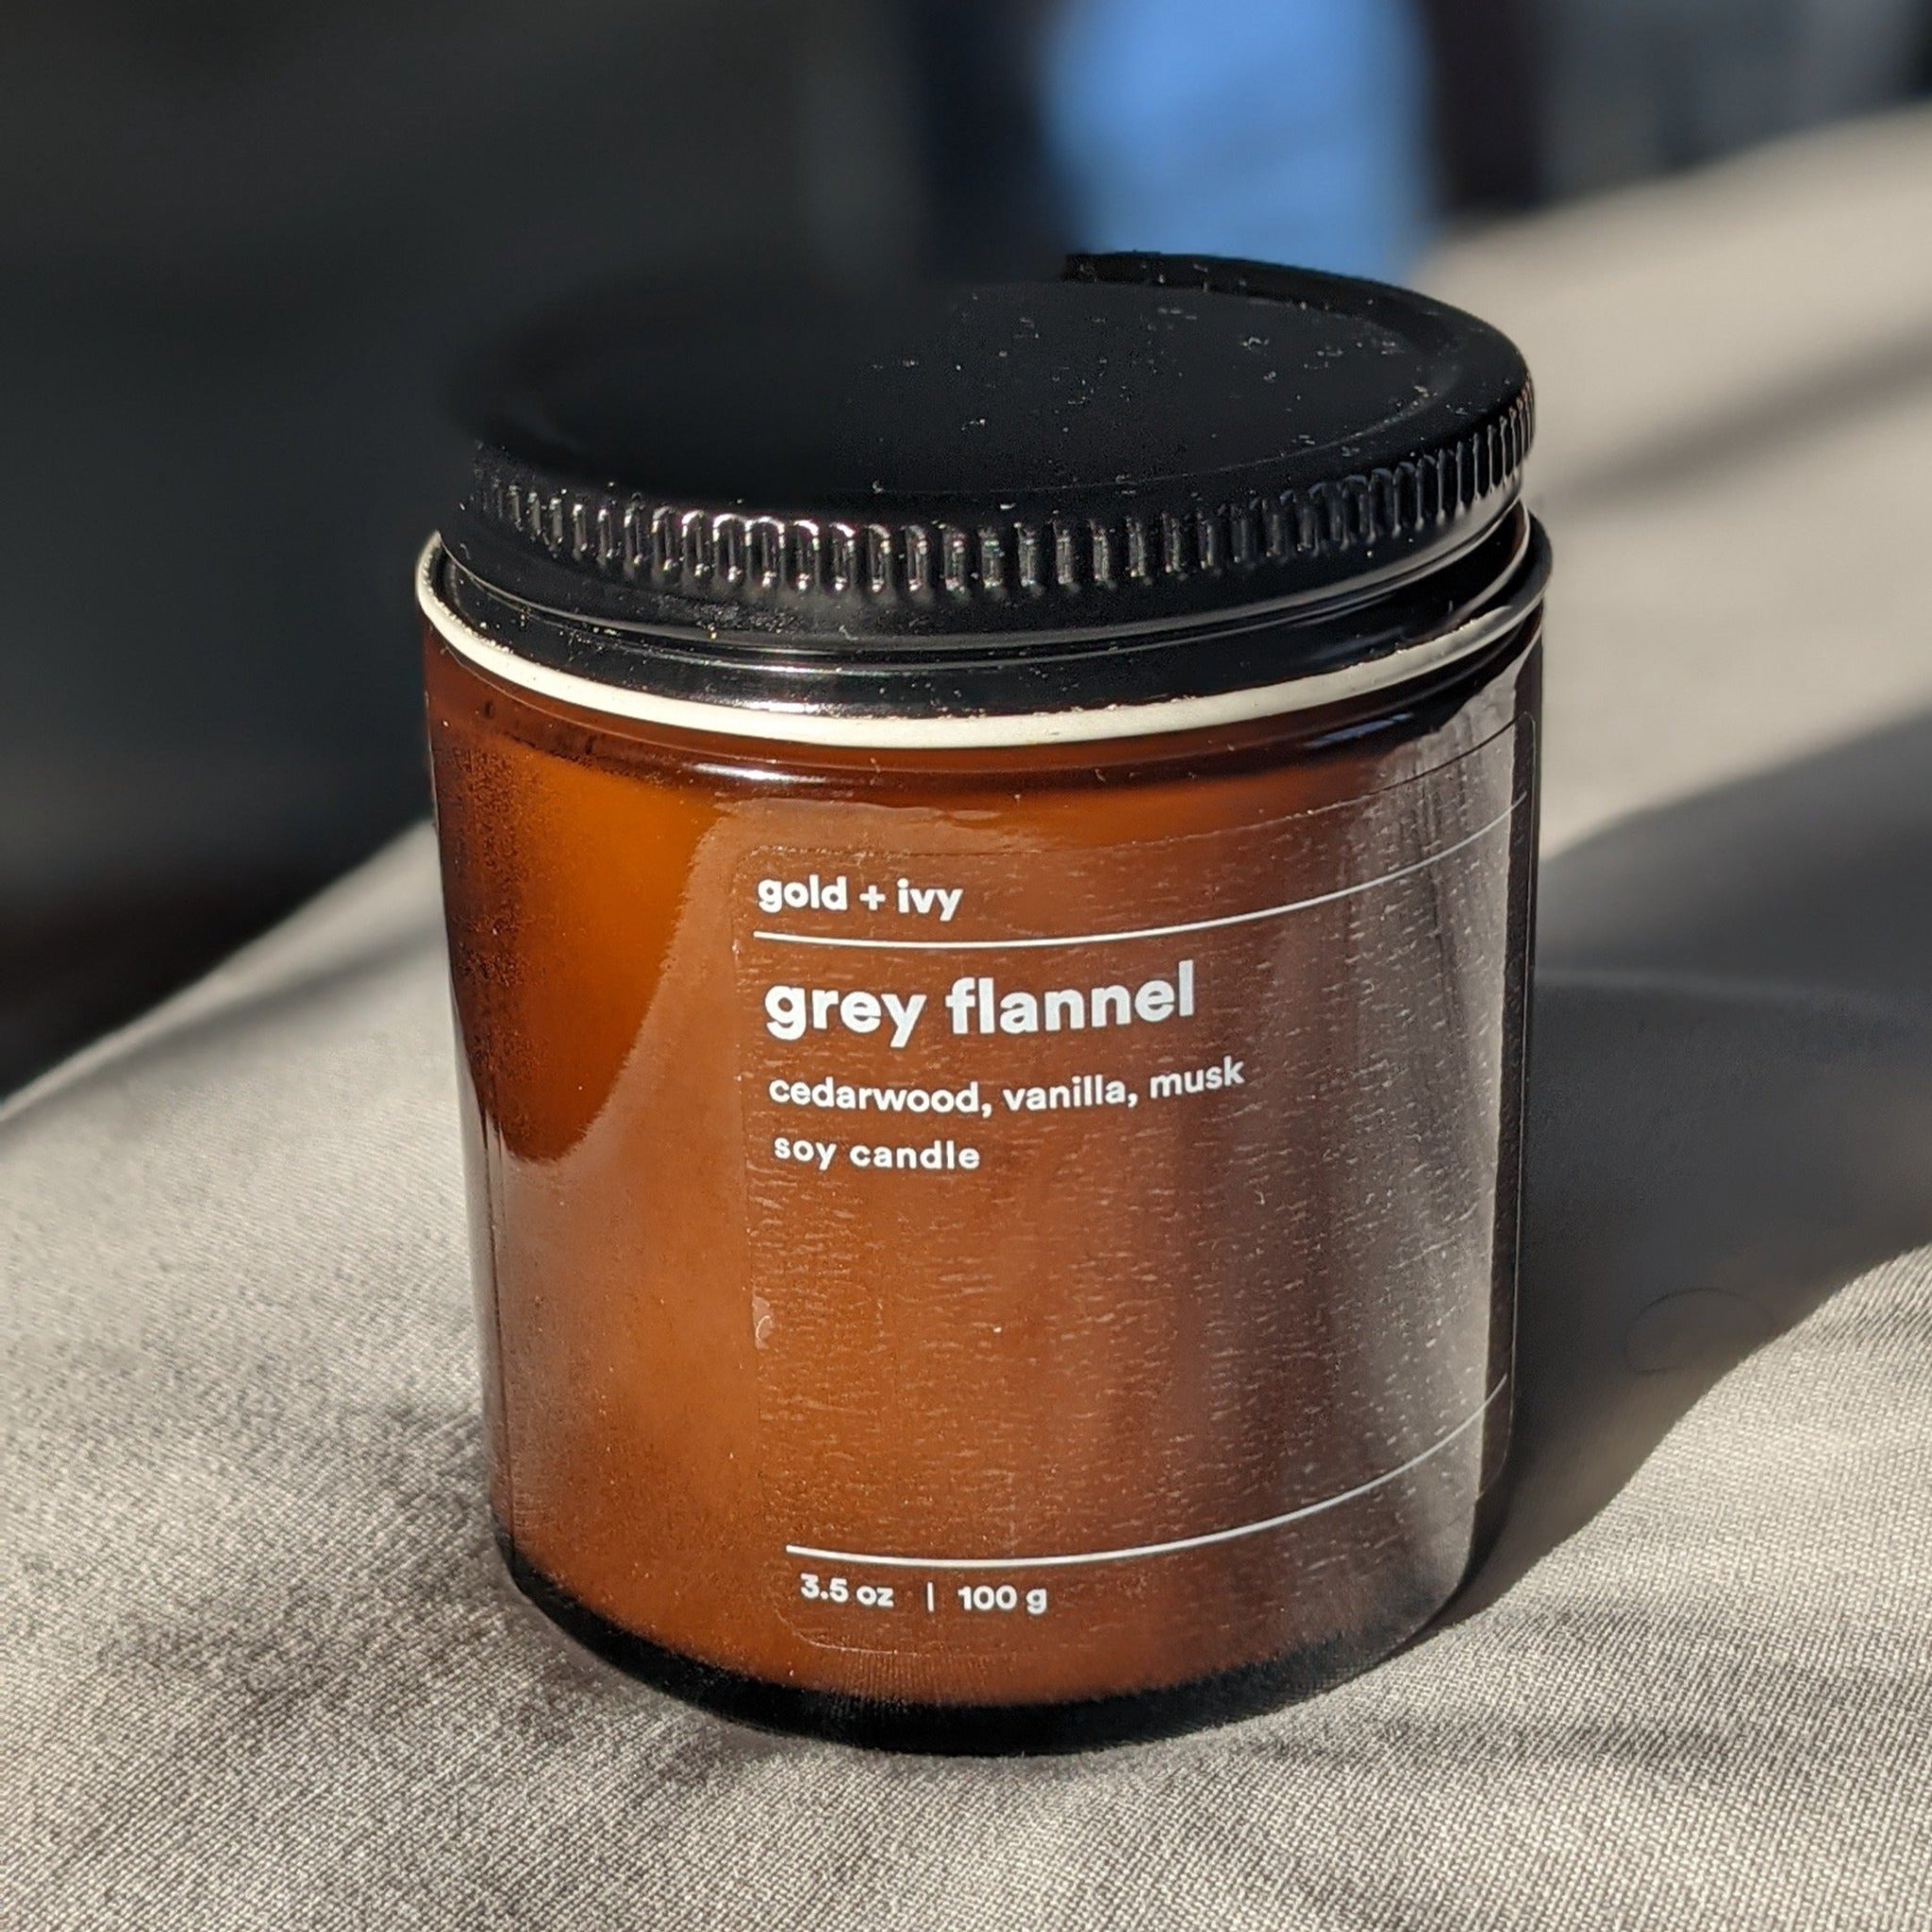 You're in your favorite jammies, sipping warm cider, by a cozy fire, Holiday tunes are playing, and your heart is full! Let us take you there with the pleasantly potent aroma of Grey Flannel candle. 